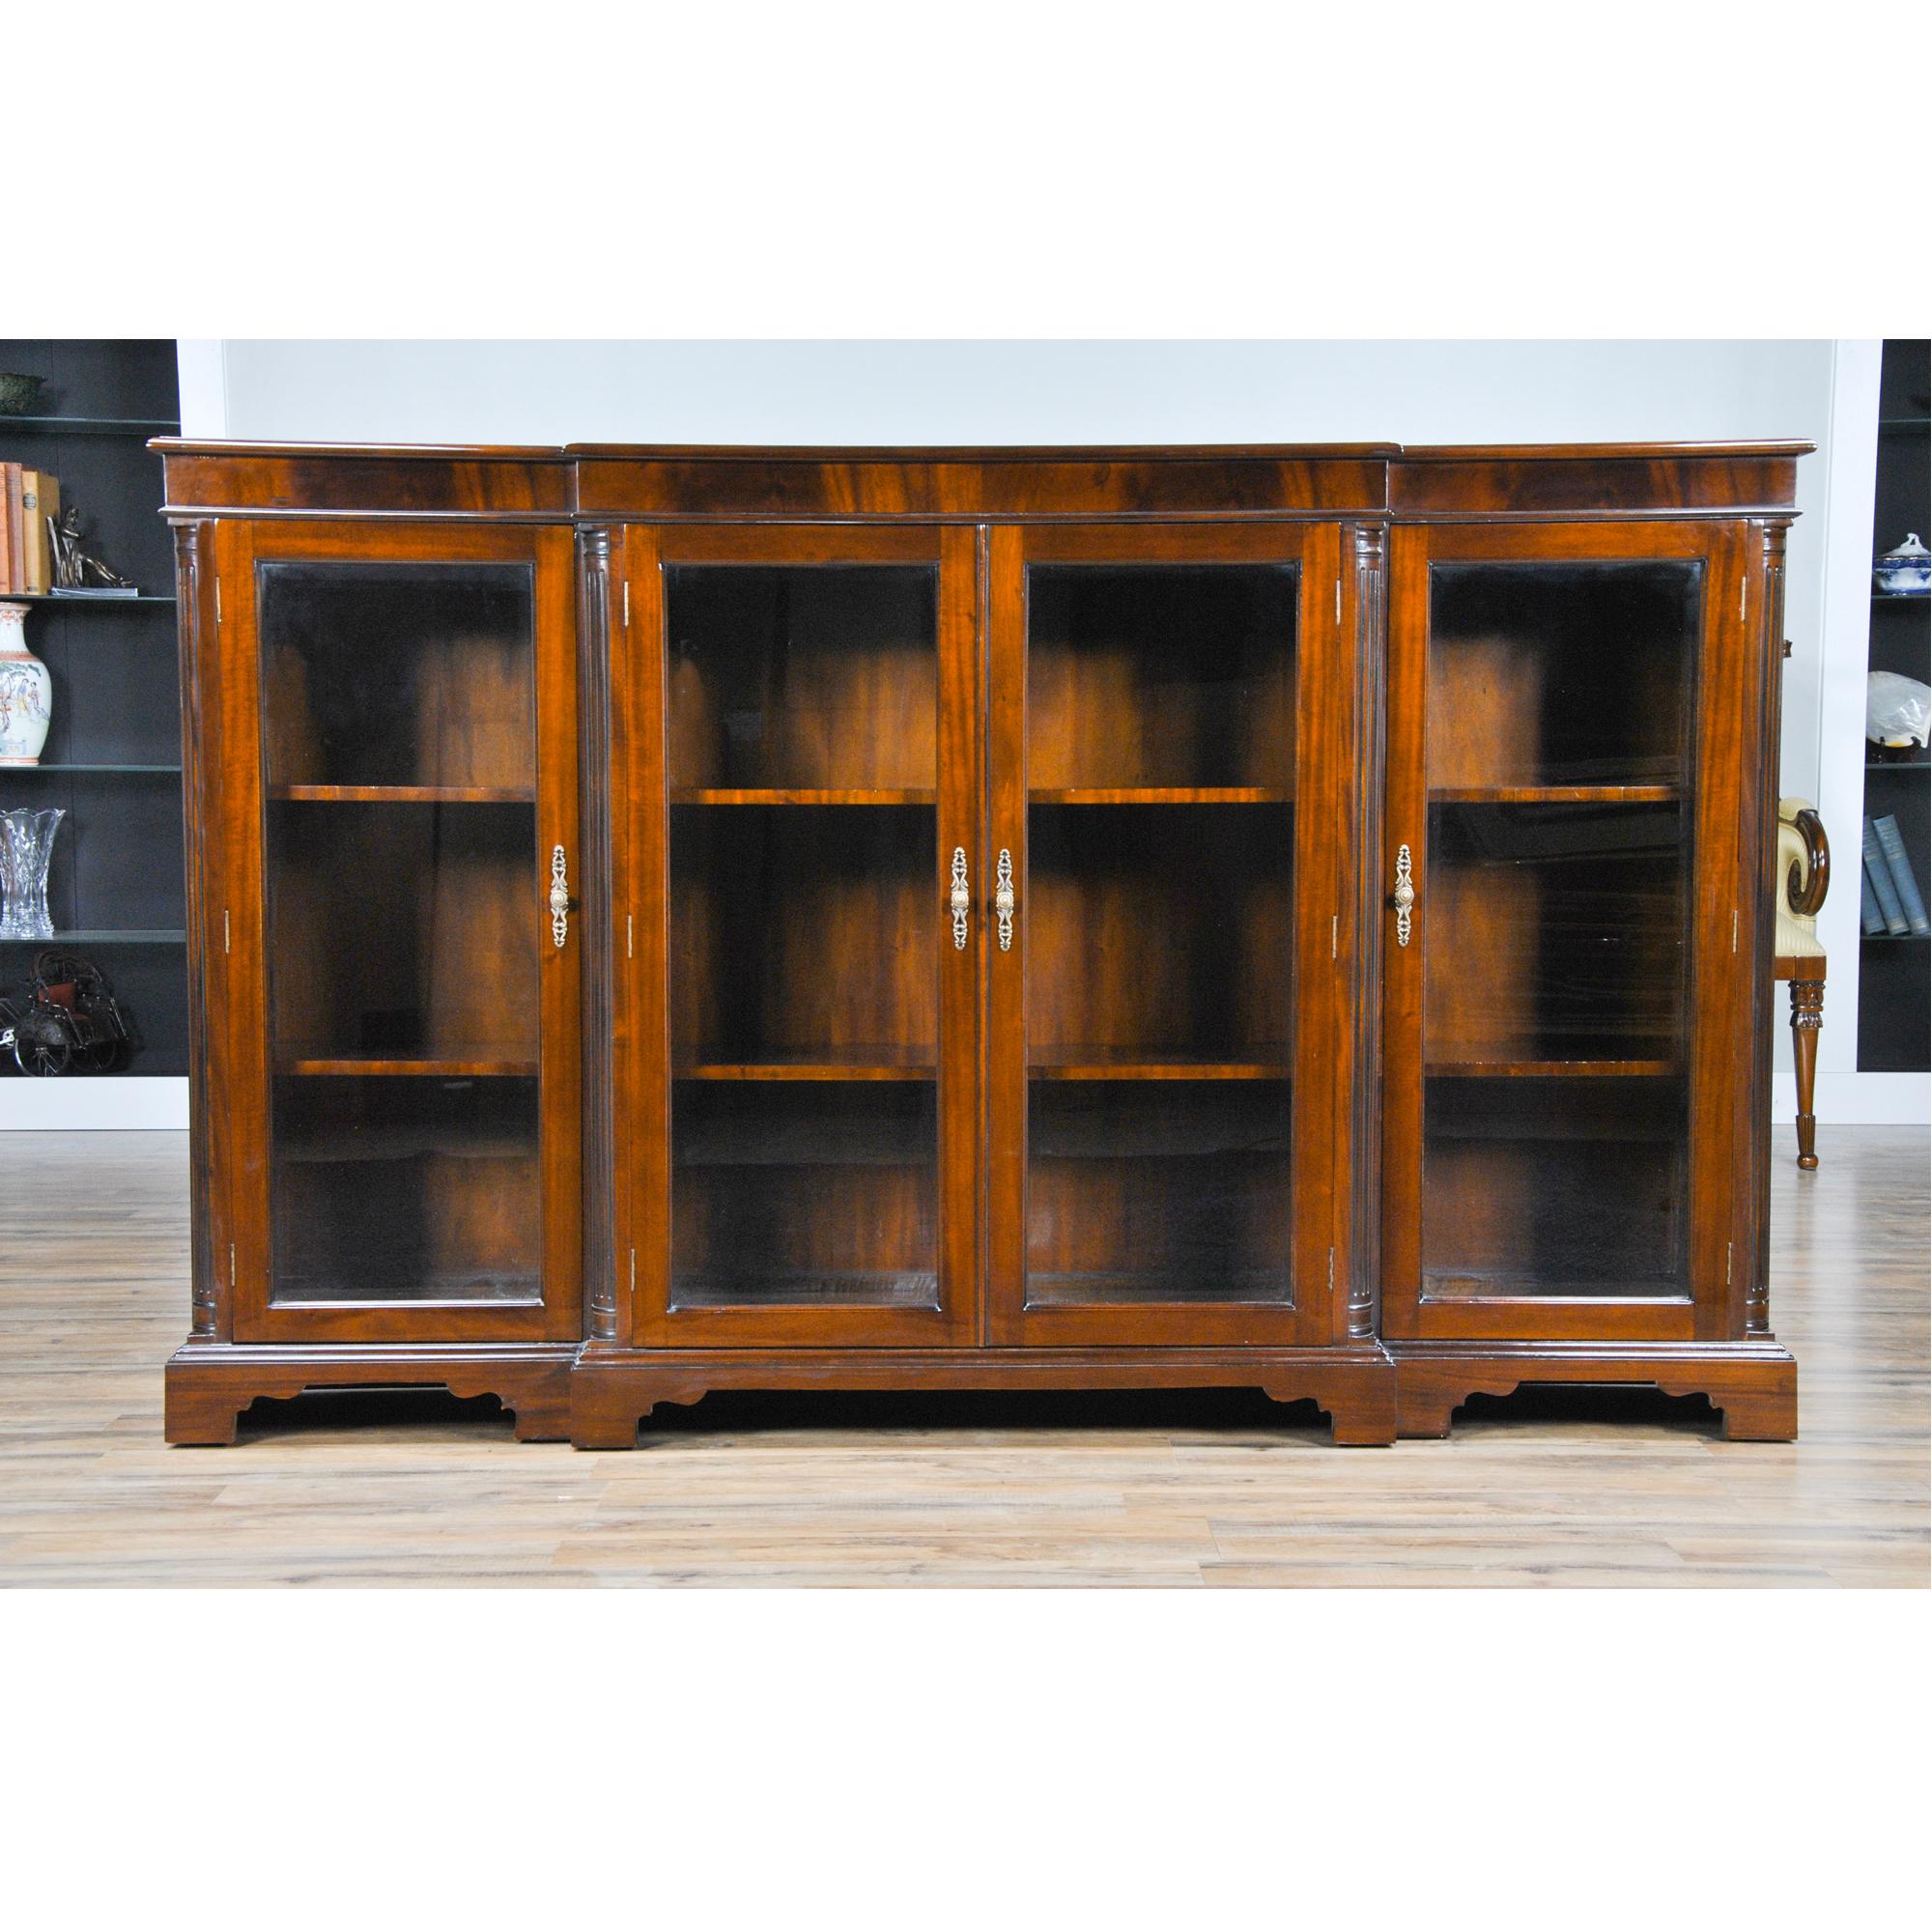 Our version of a breakfront bookcase, this is the Niagara Furniture Four Door Bookcase. The shape of the piece with the center section protruding past the side sections gives it a depth and character not found in most antique reproductions. With